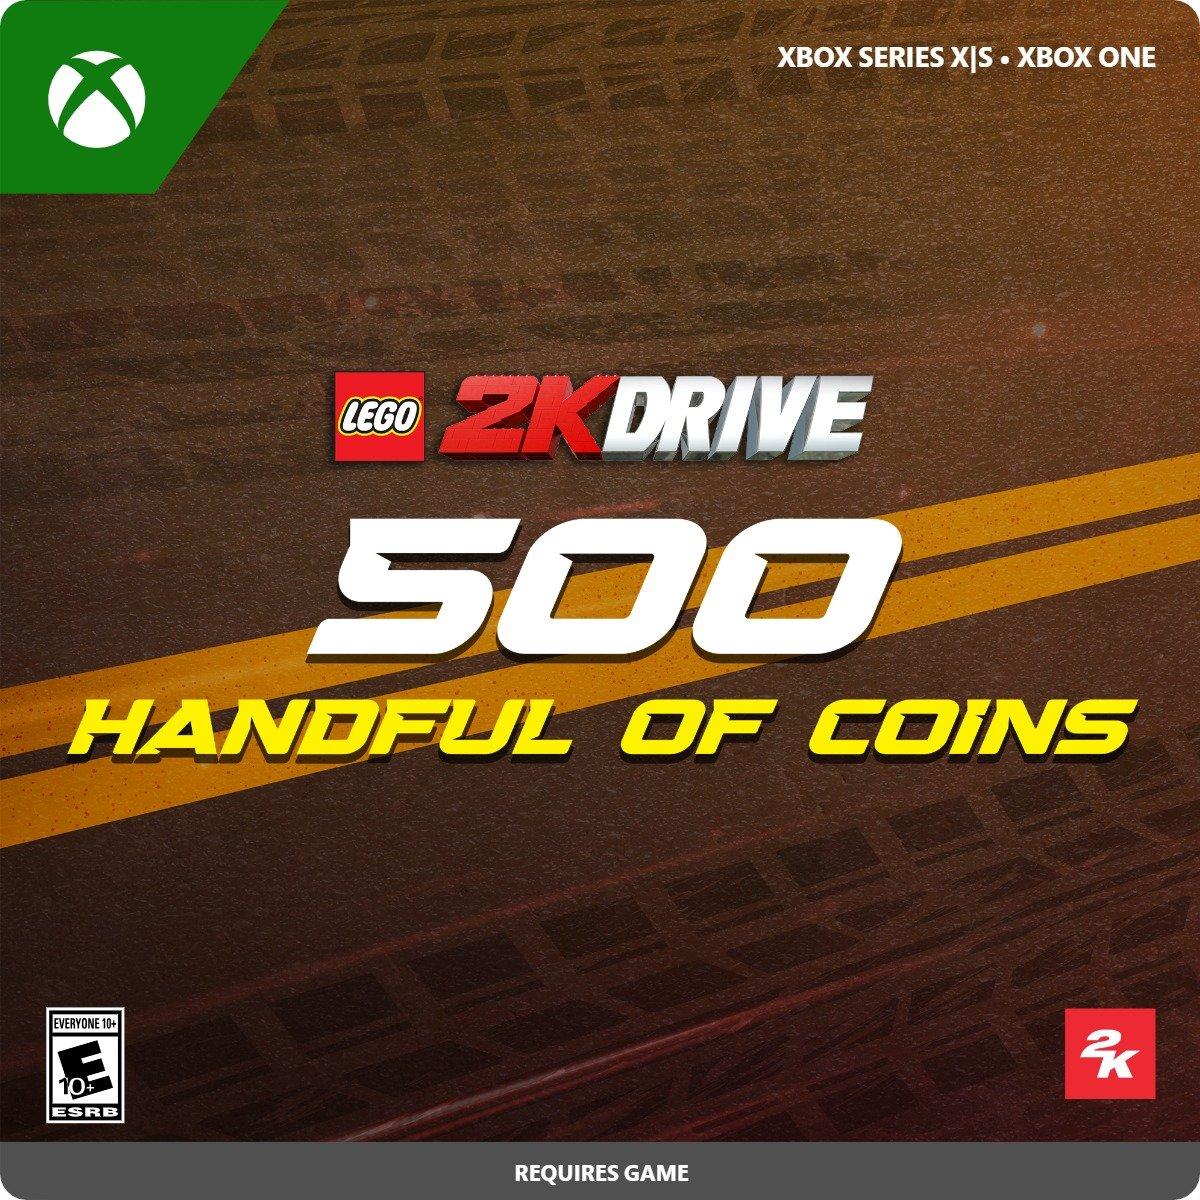 LEGO 2K Drive: Coin Currency - Xbox Series X 500